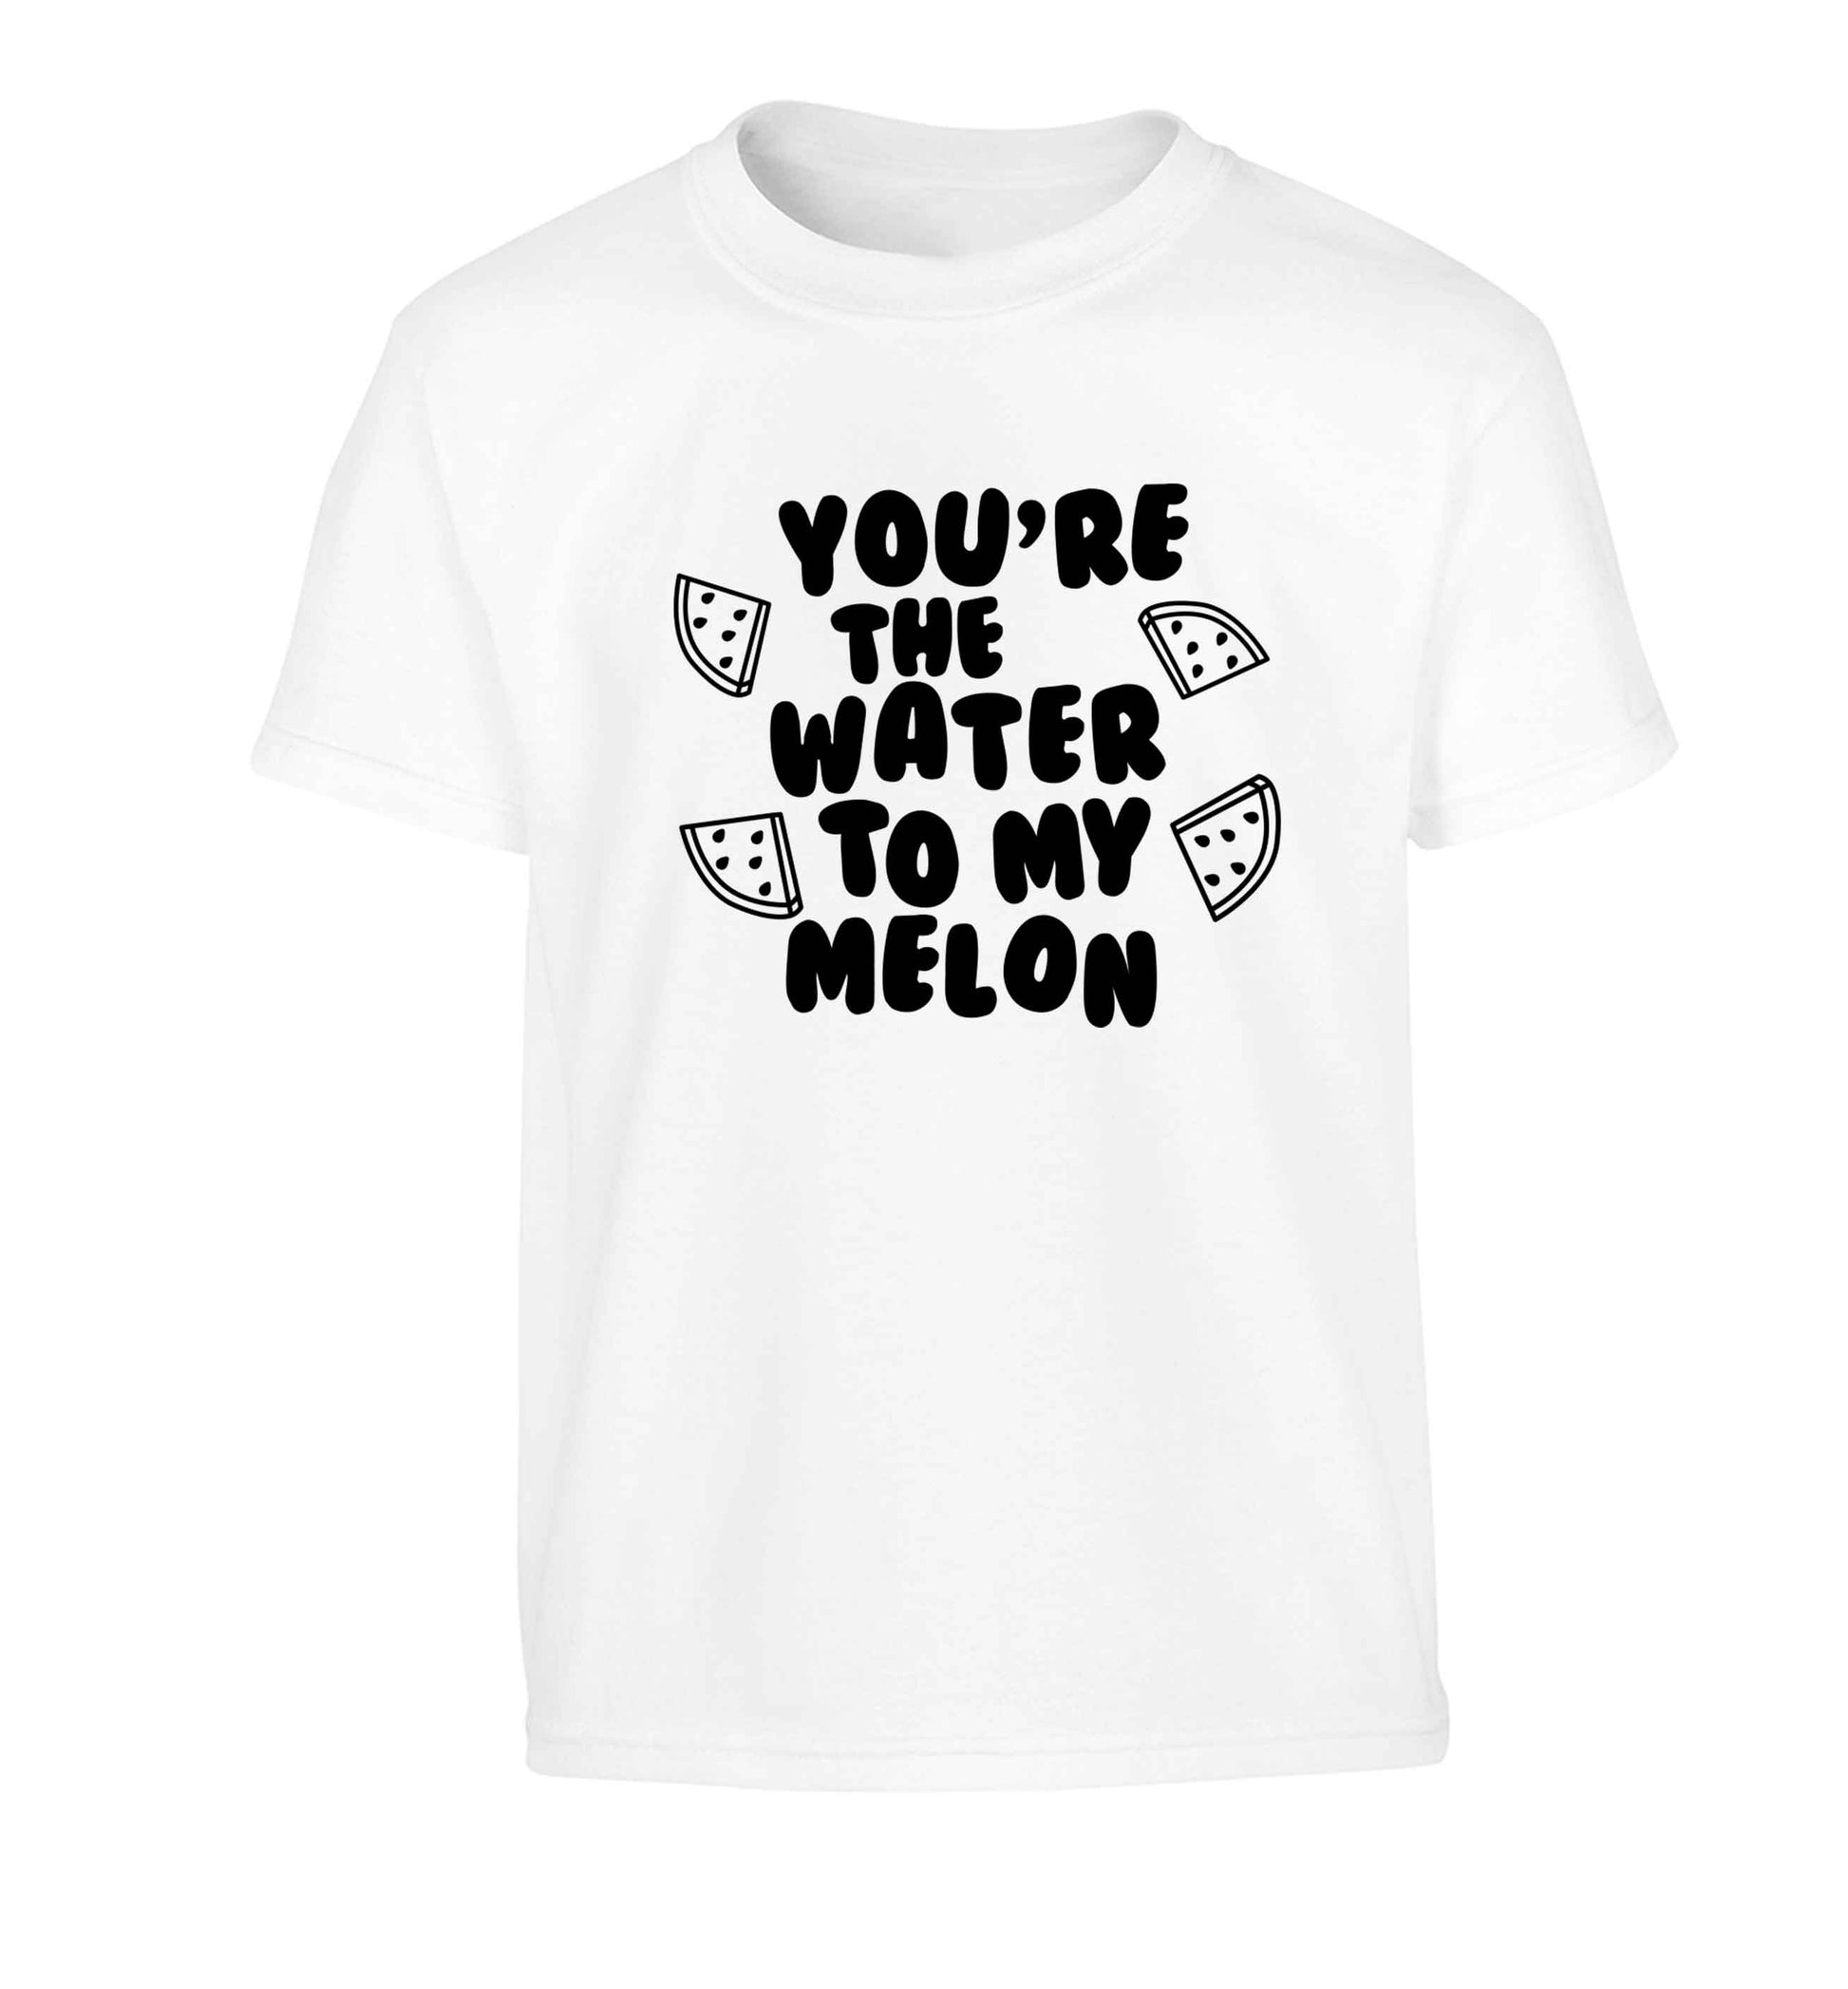 You're the water to my melon Children's white Tshirt 12-13 Years